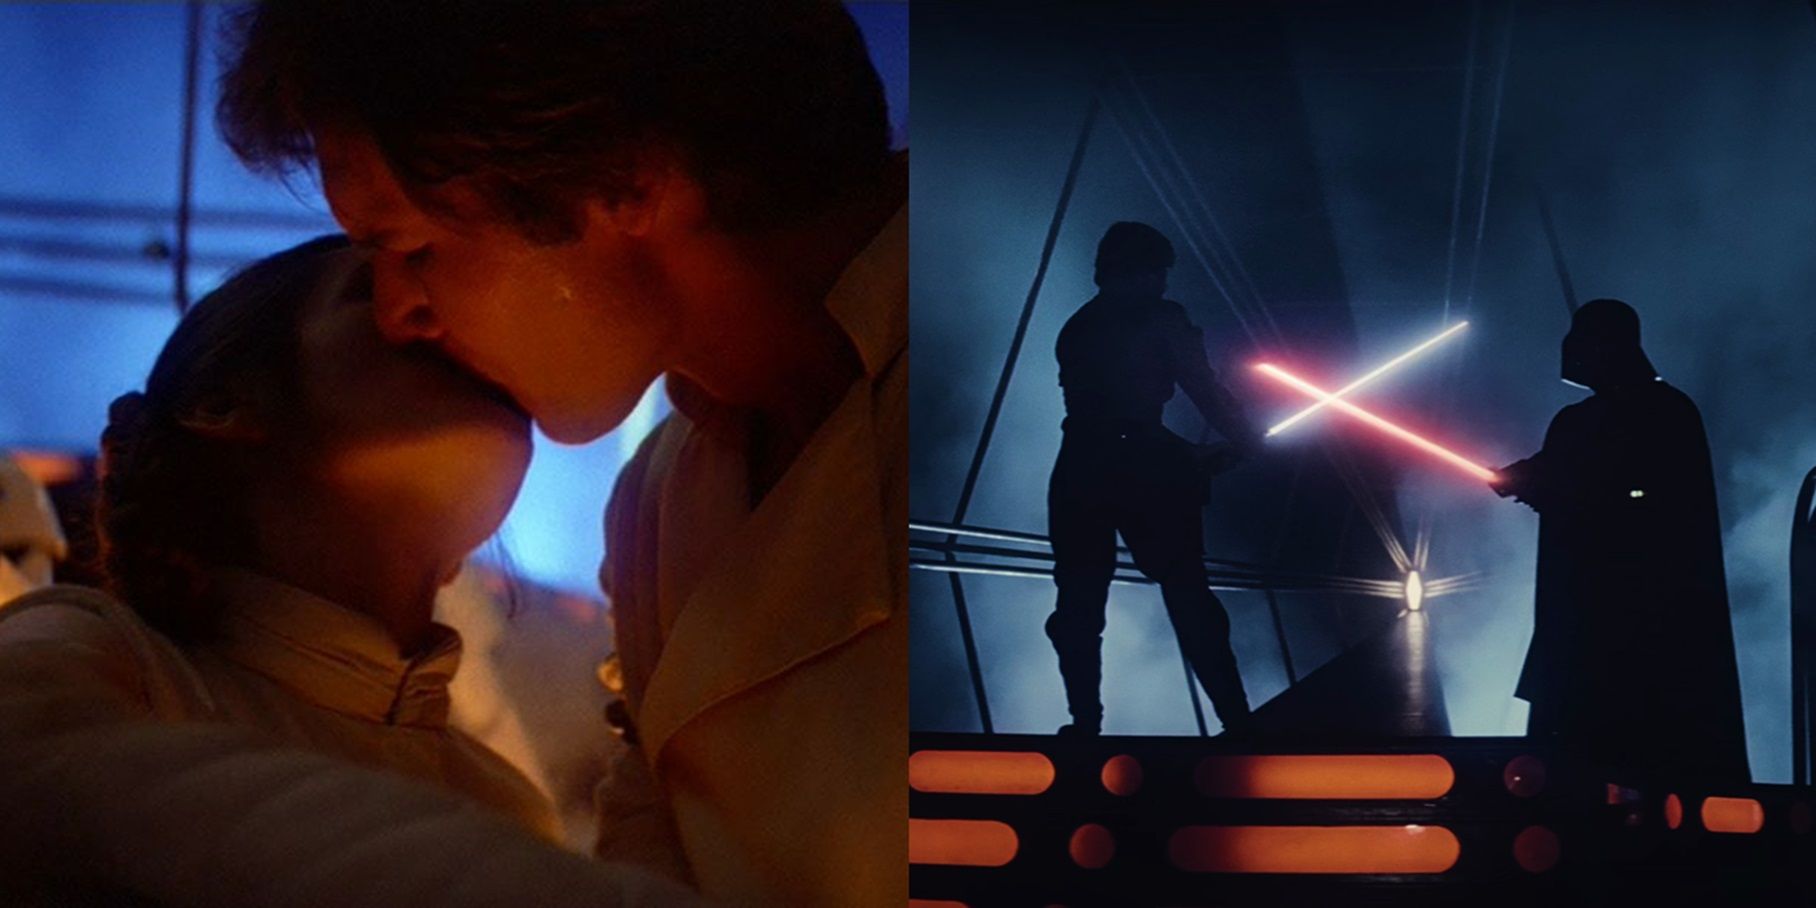 Han and Leia kiss and Luke and Vader duel in The Empire Strikes Back